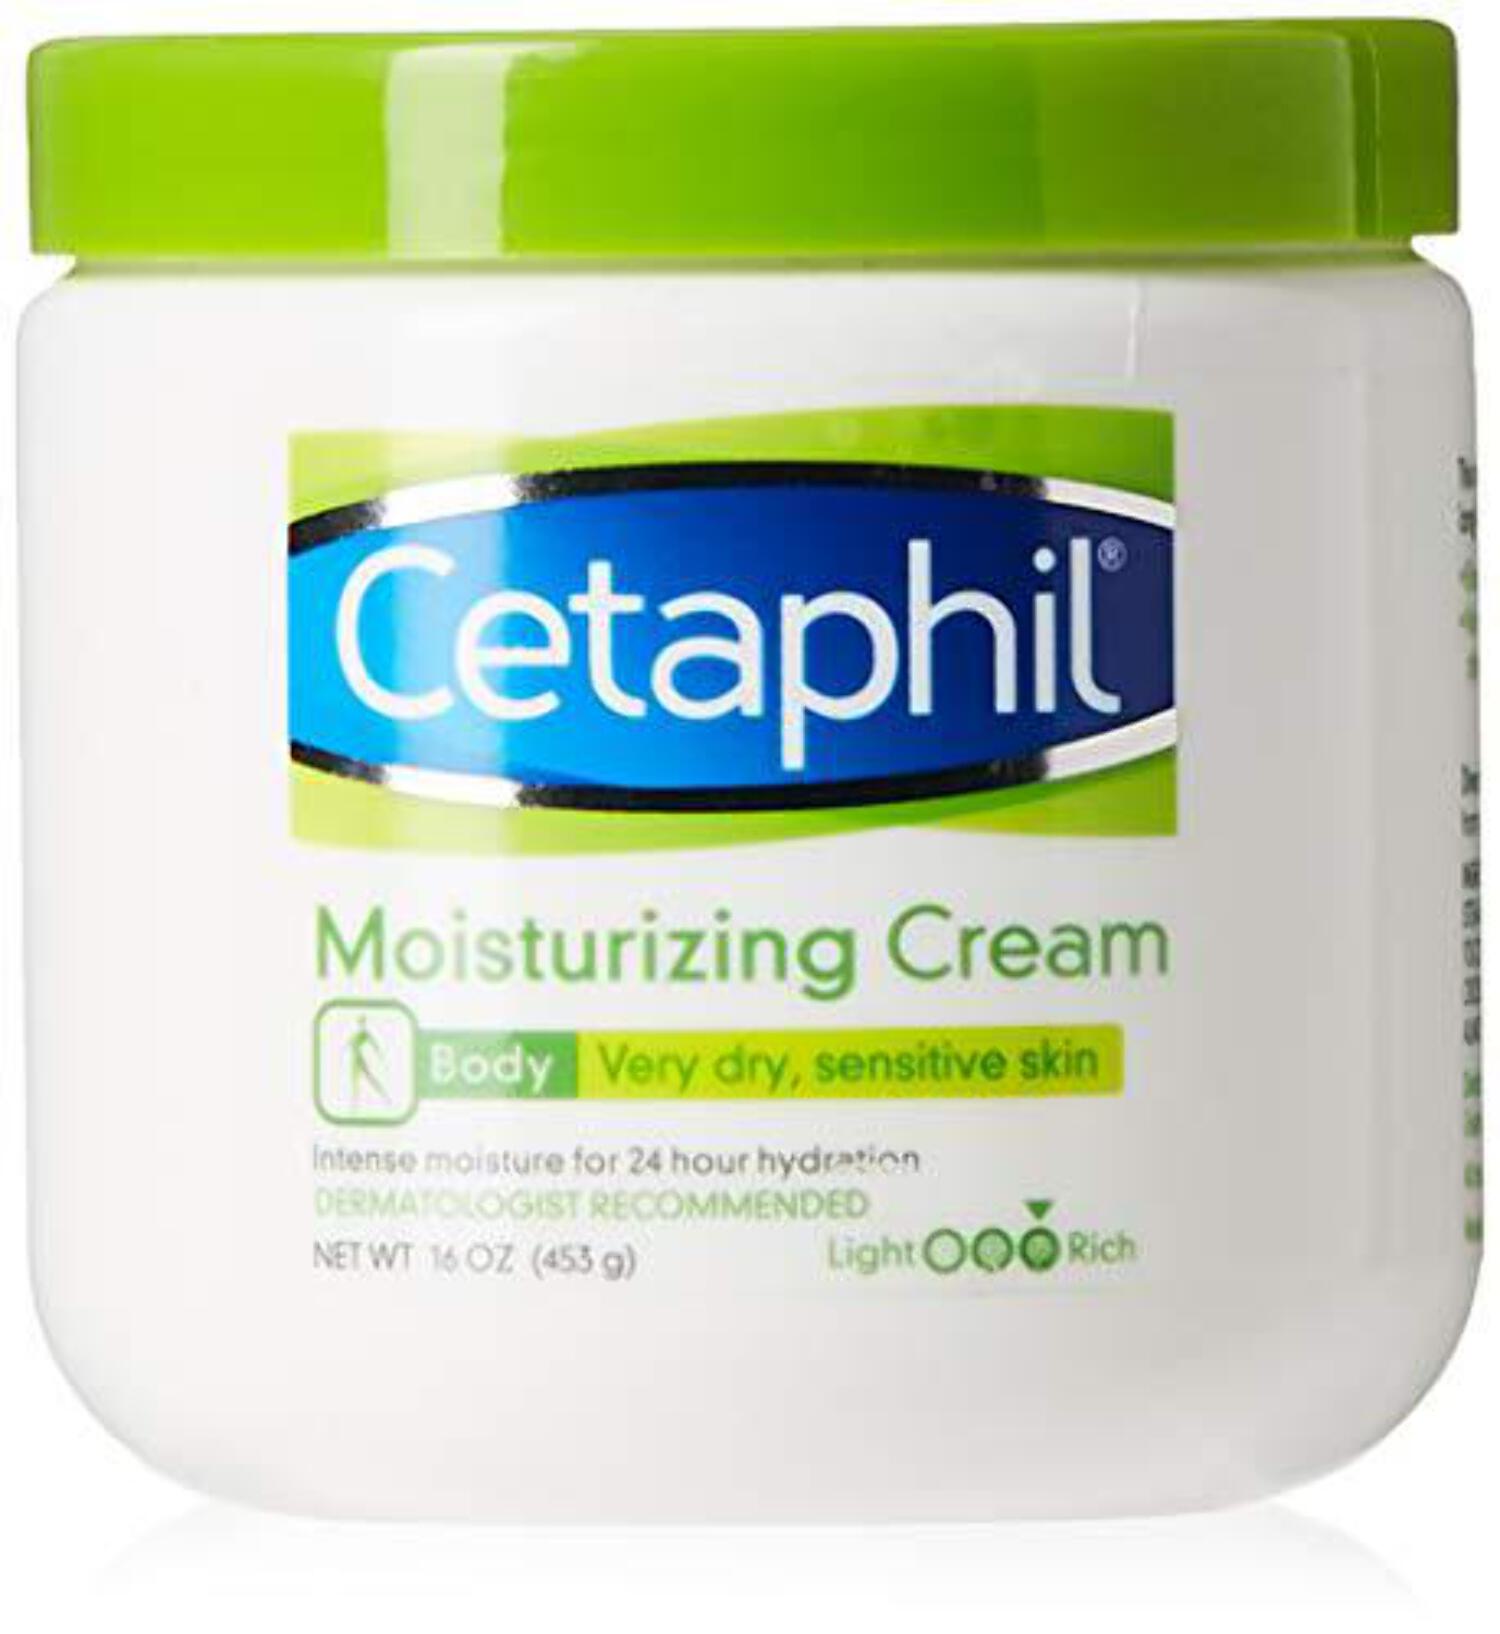 Cetaphil Moisturizing Cream, Hydrating Moisturizer For Dry To Very Dry, Sensitive Skin, Fragrance Free, Non-Greasy, Dermatologist Recommended, 16 Oz. - image 1 of 8